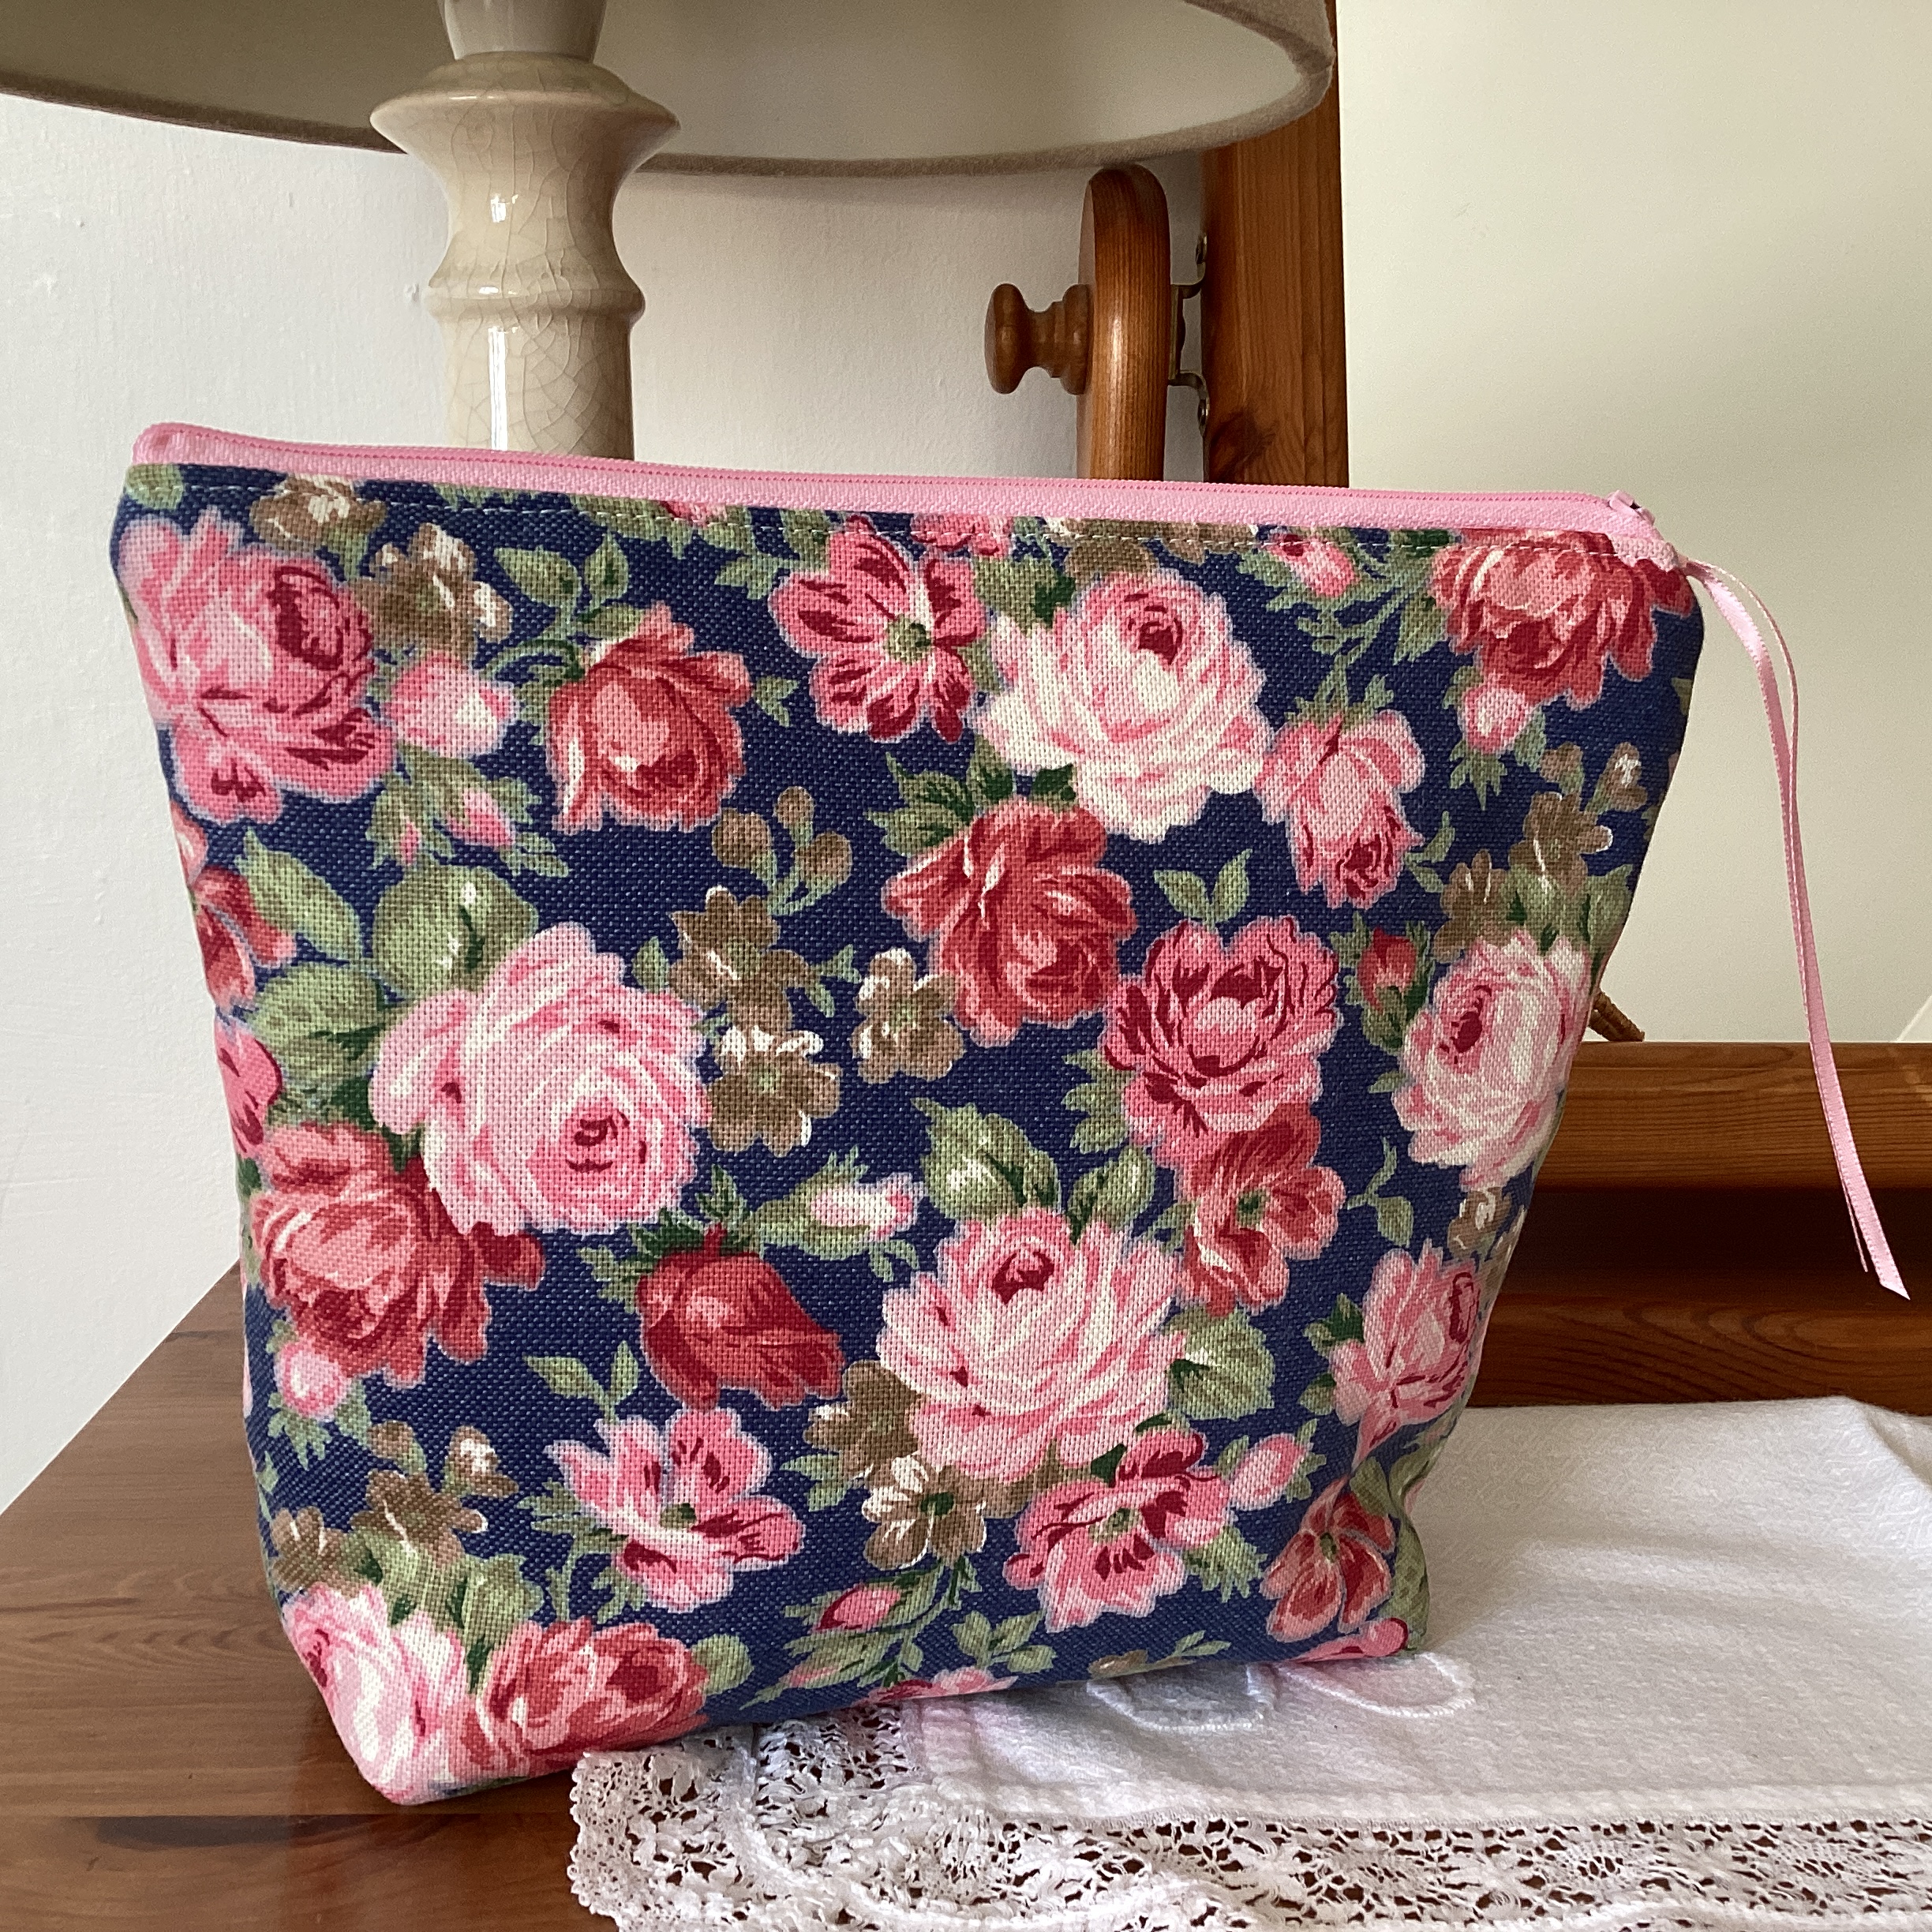 Zipped Pouch - pink floral on blue